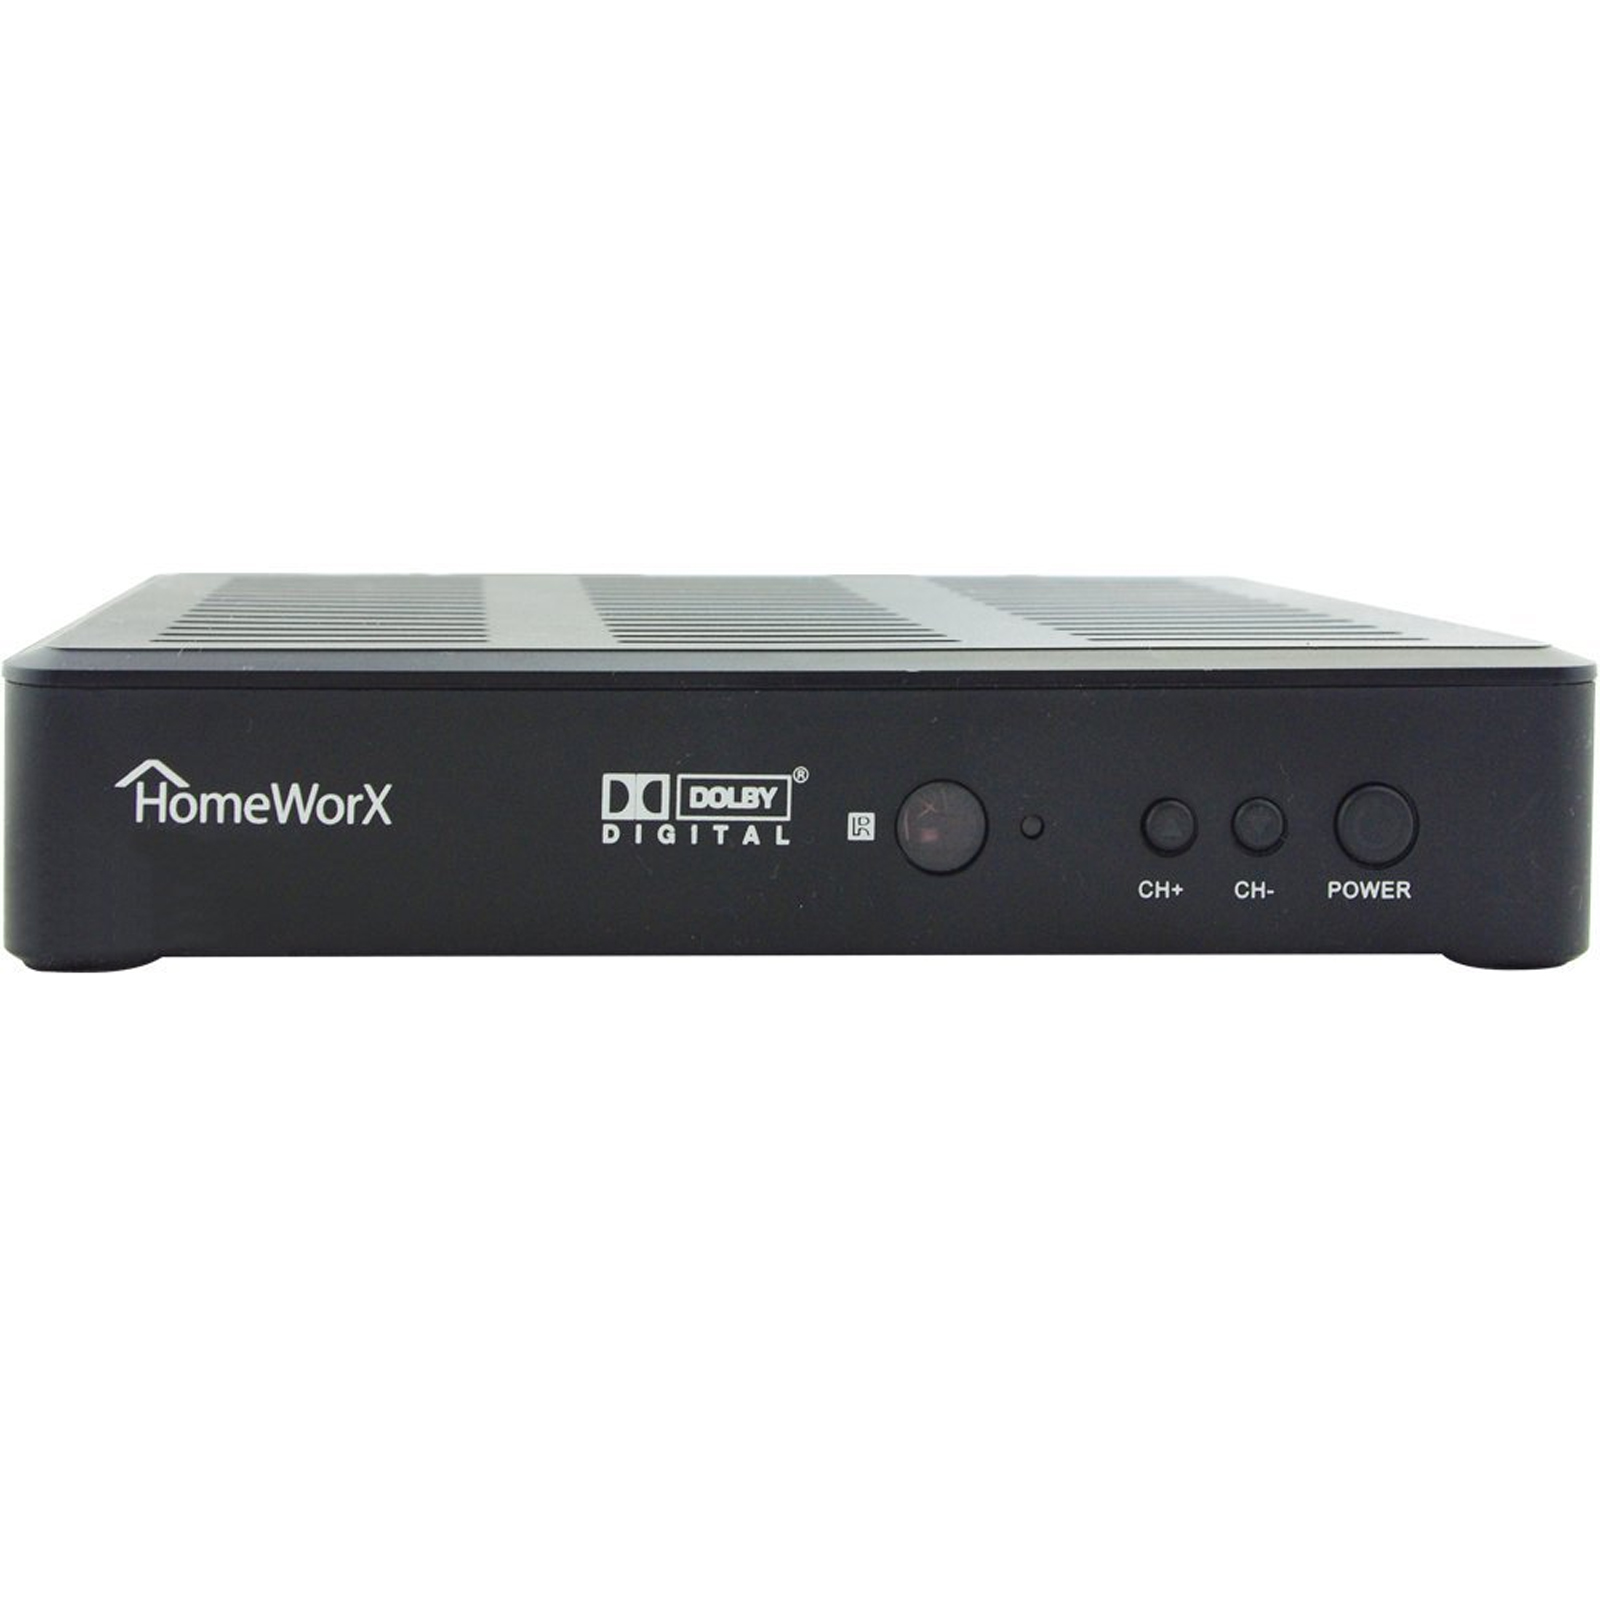 Homeworx Hdtv Digital Converter Box with Media Player Function & Dolby Digital & Hdmi Out